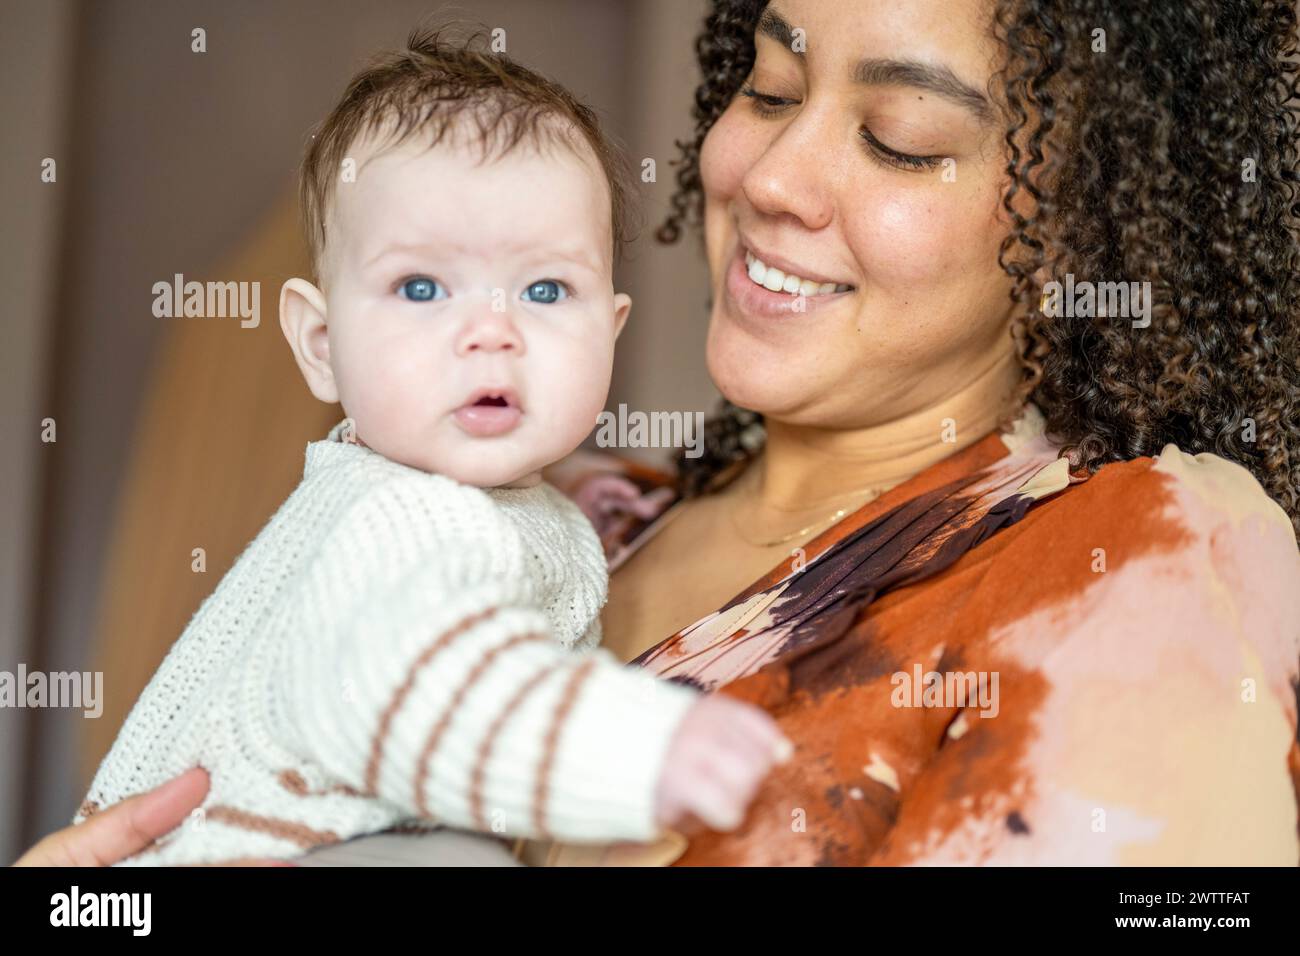 A mother cradles her baby with a tender smile. Stock Photo